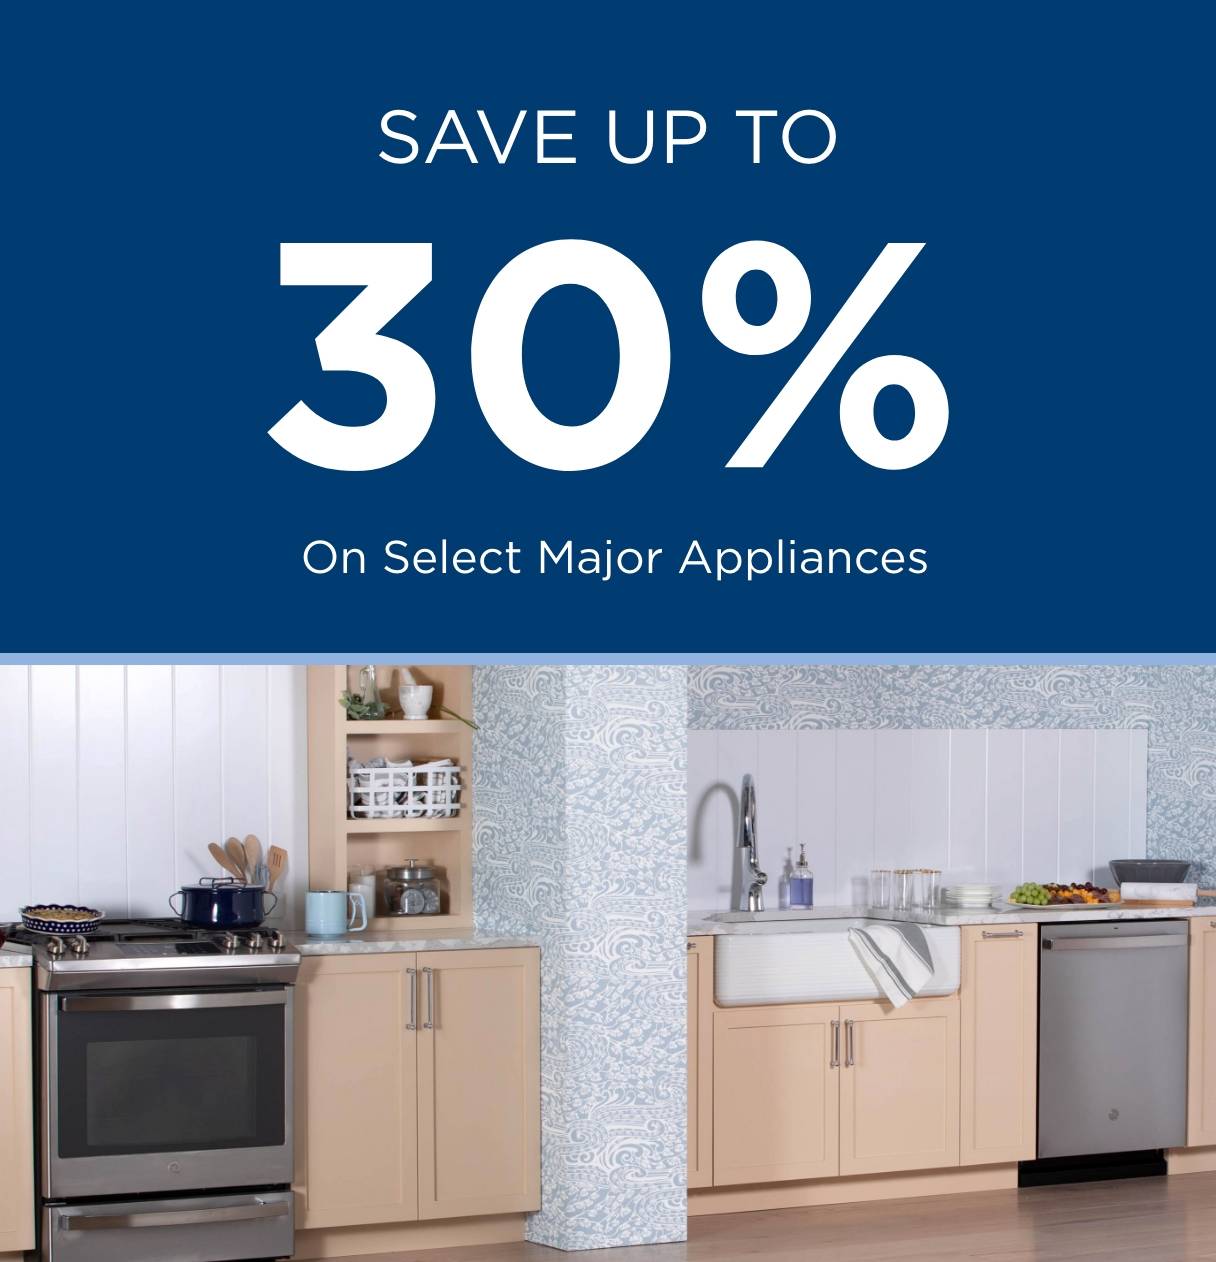 Save up to 30% OFF select major appliances